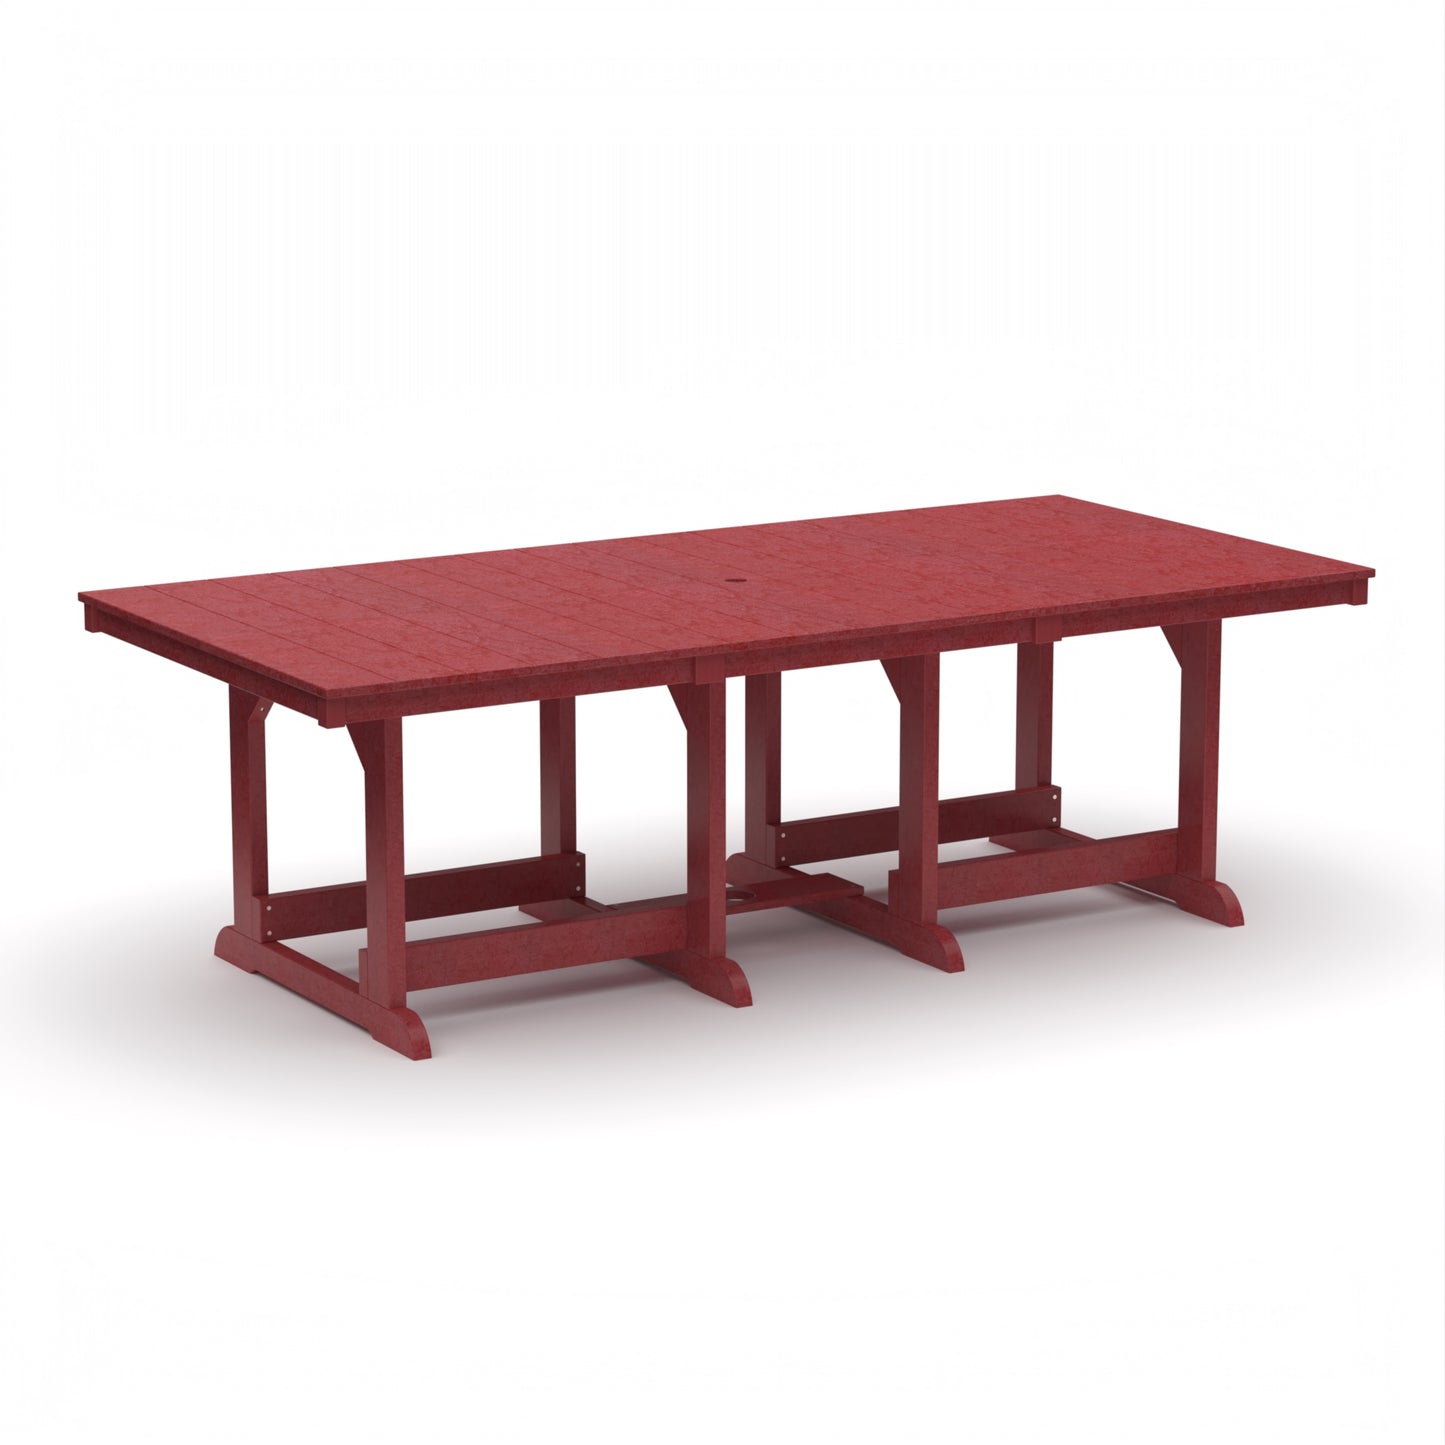 Wildridge Recycled Plastic Heritage Outdoor Dining Table 44x94 - LEAD TIME TO SHIP 6 WEEKS OR LESS